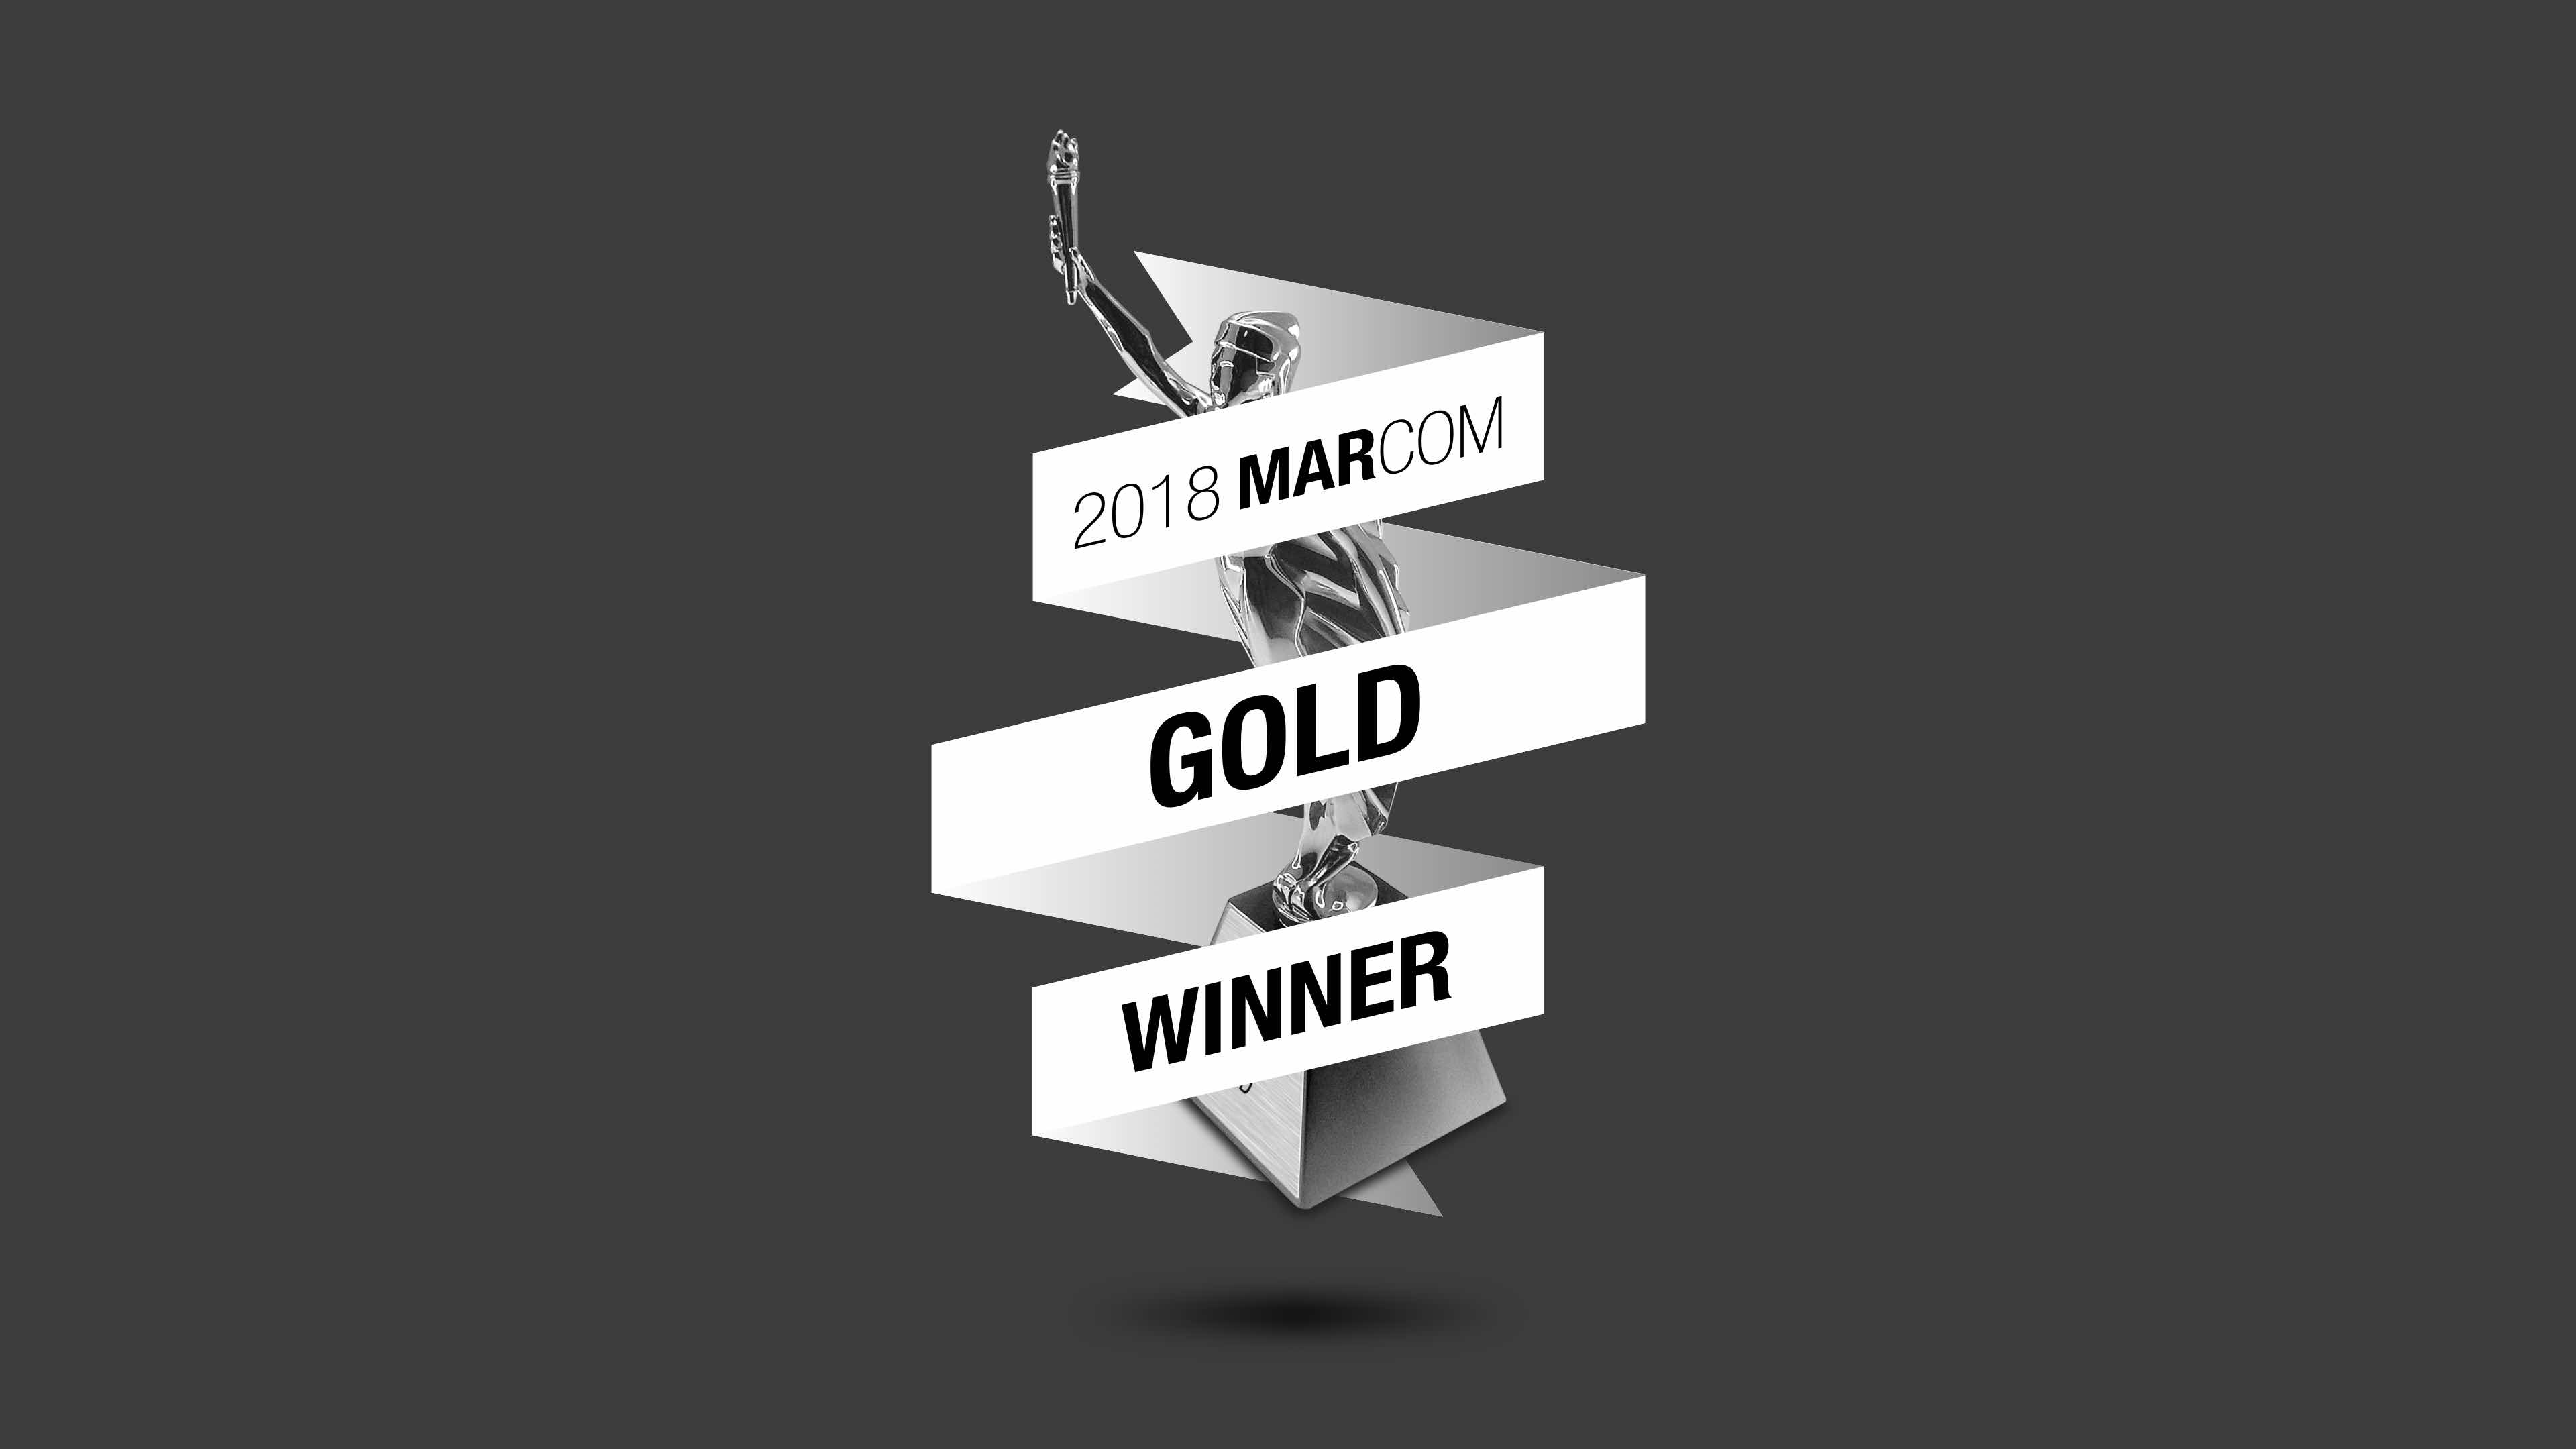 Rareview honored with the 2018 Marcom Gold Award